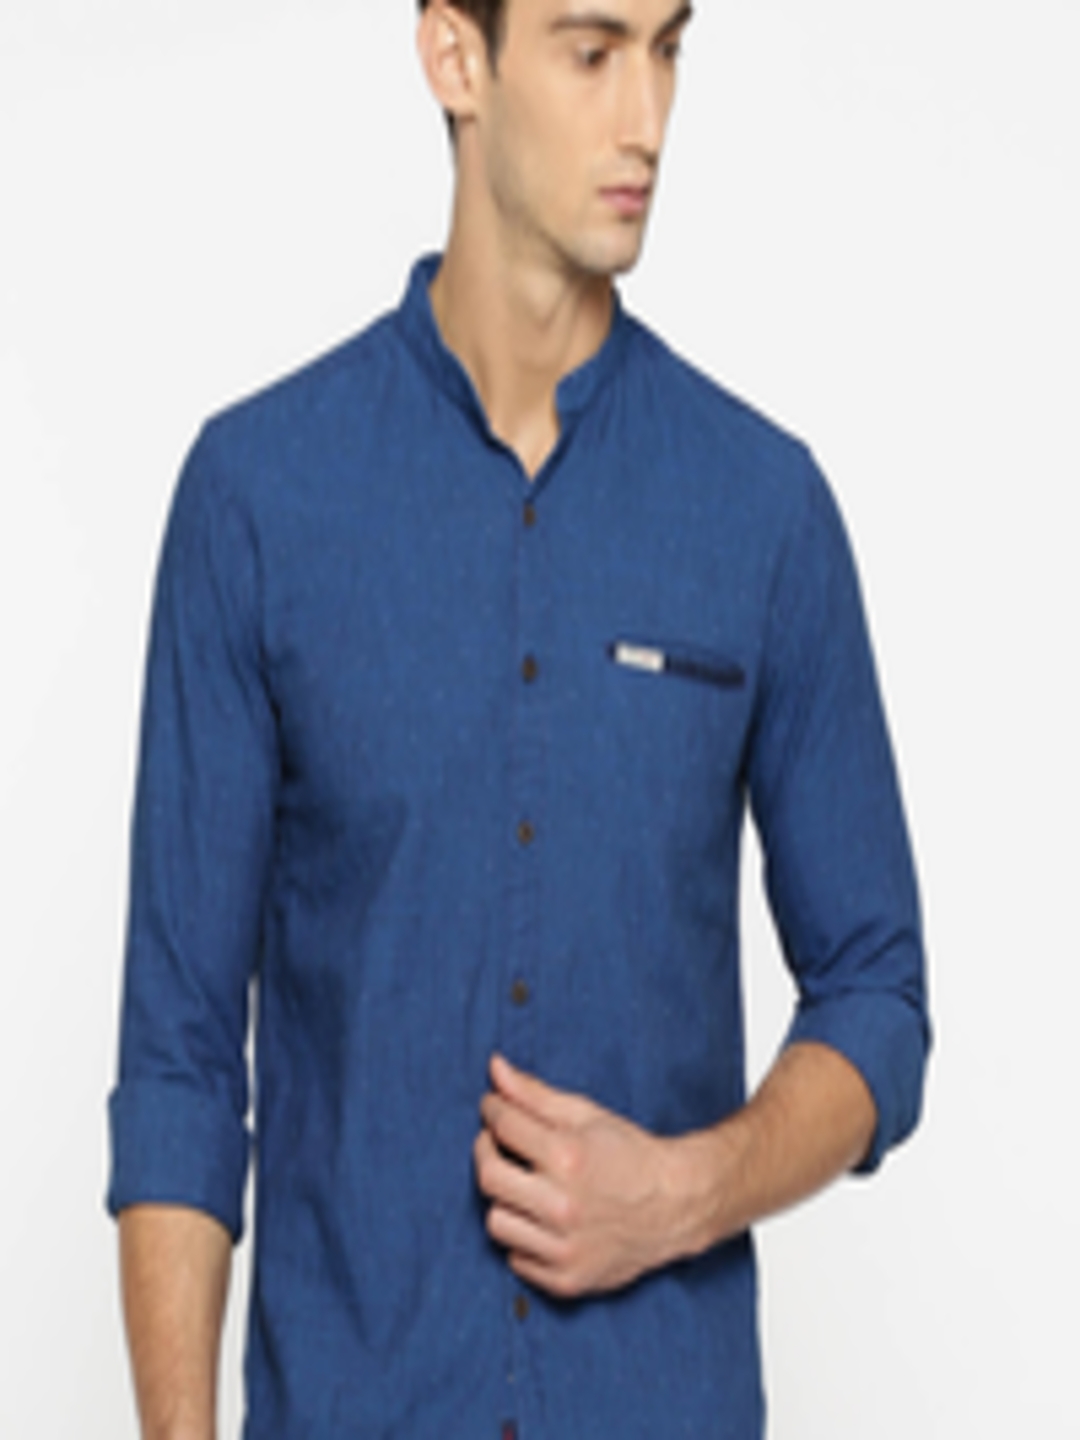 Buy Blue Textured Slim Fit Casual Shirt - Shirts for Men 7925153 | Myntra